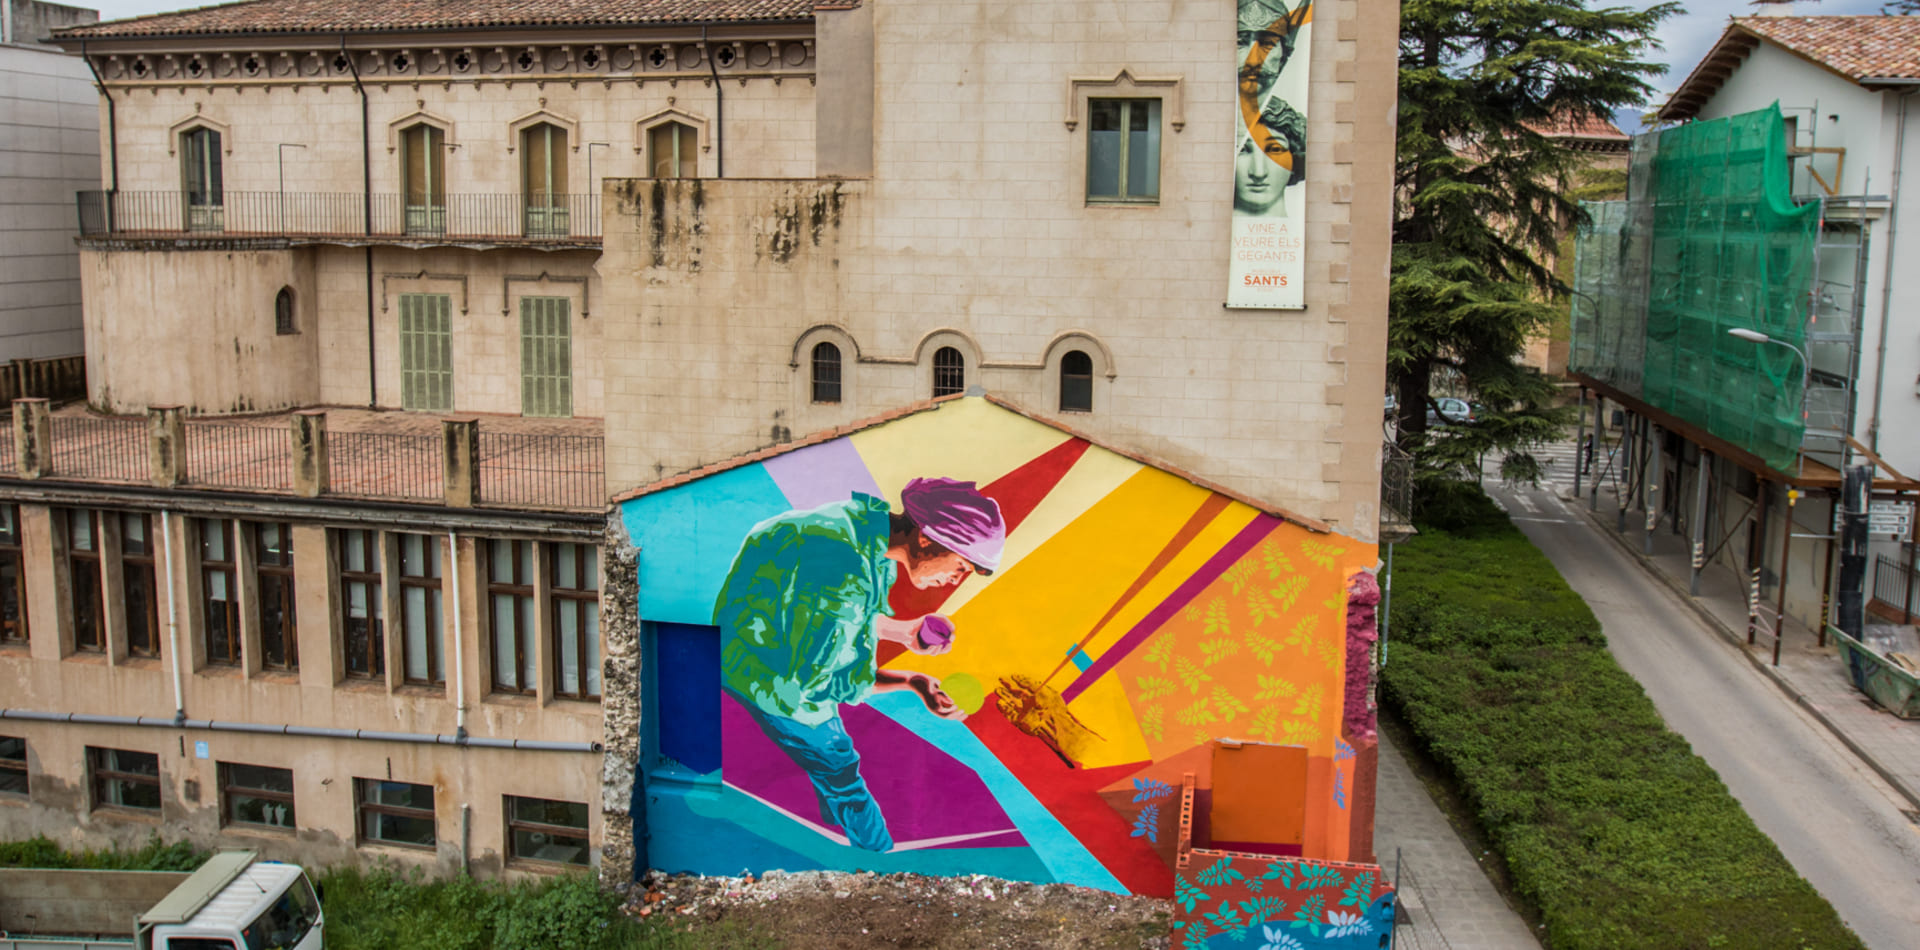 Womart mural by the artist Btoy, Olot, 2018